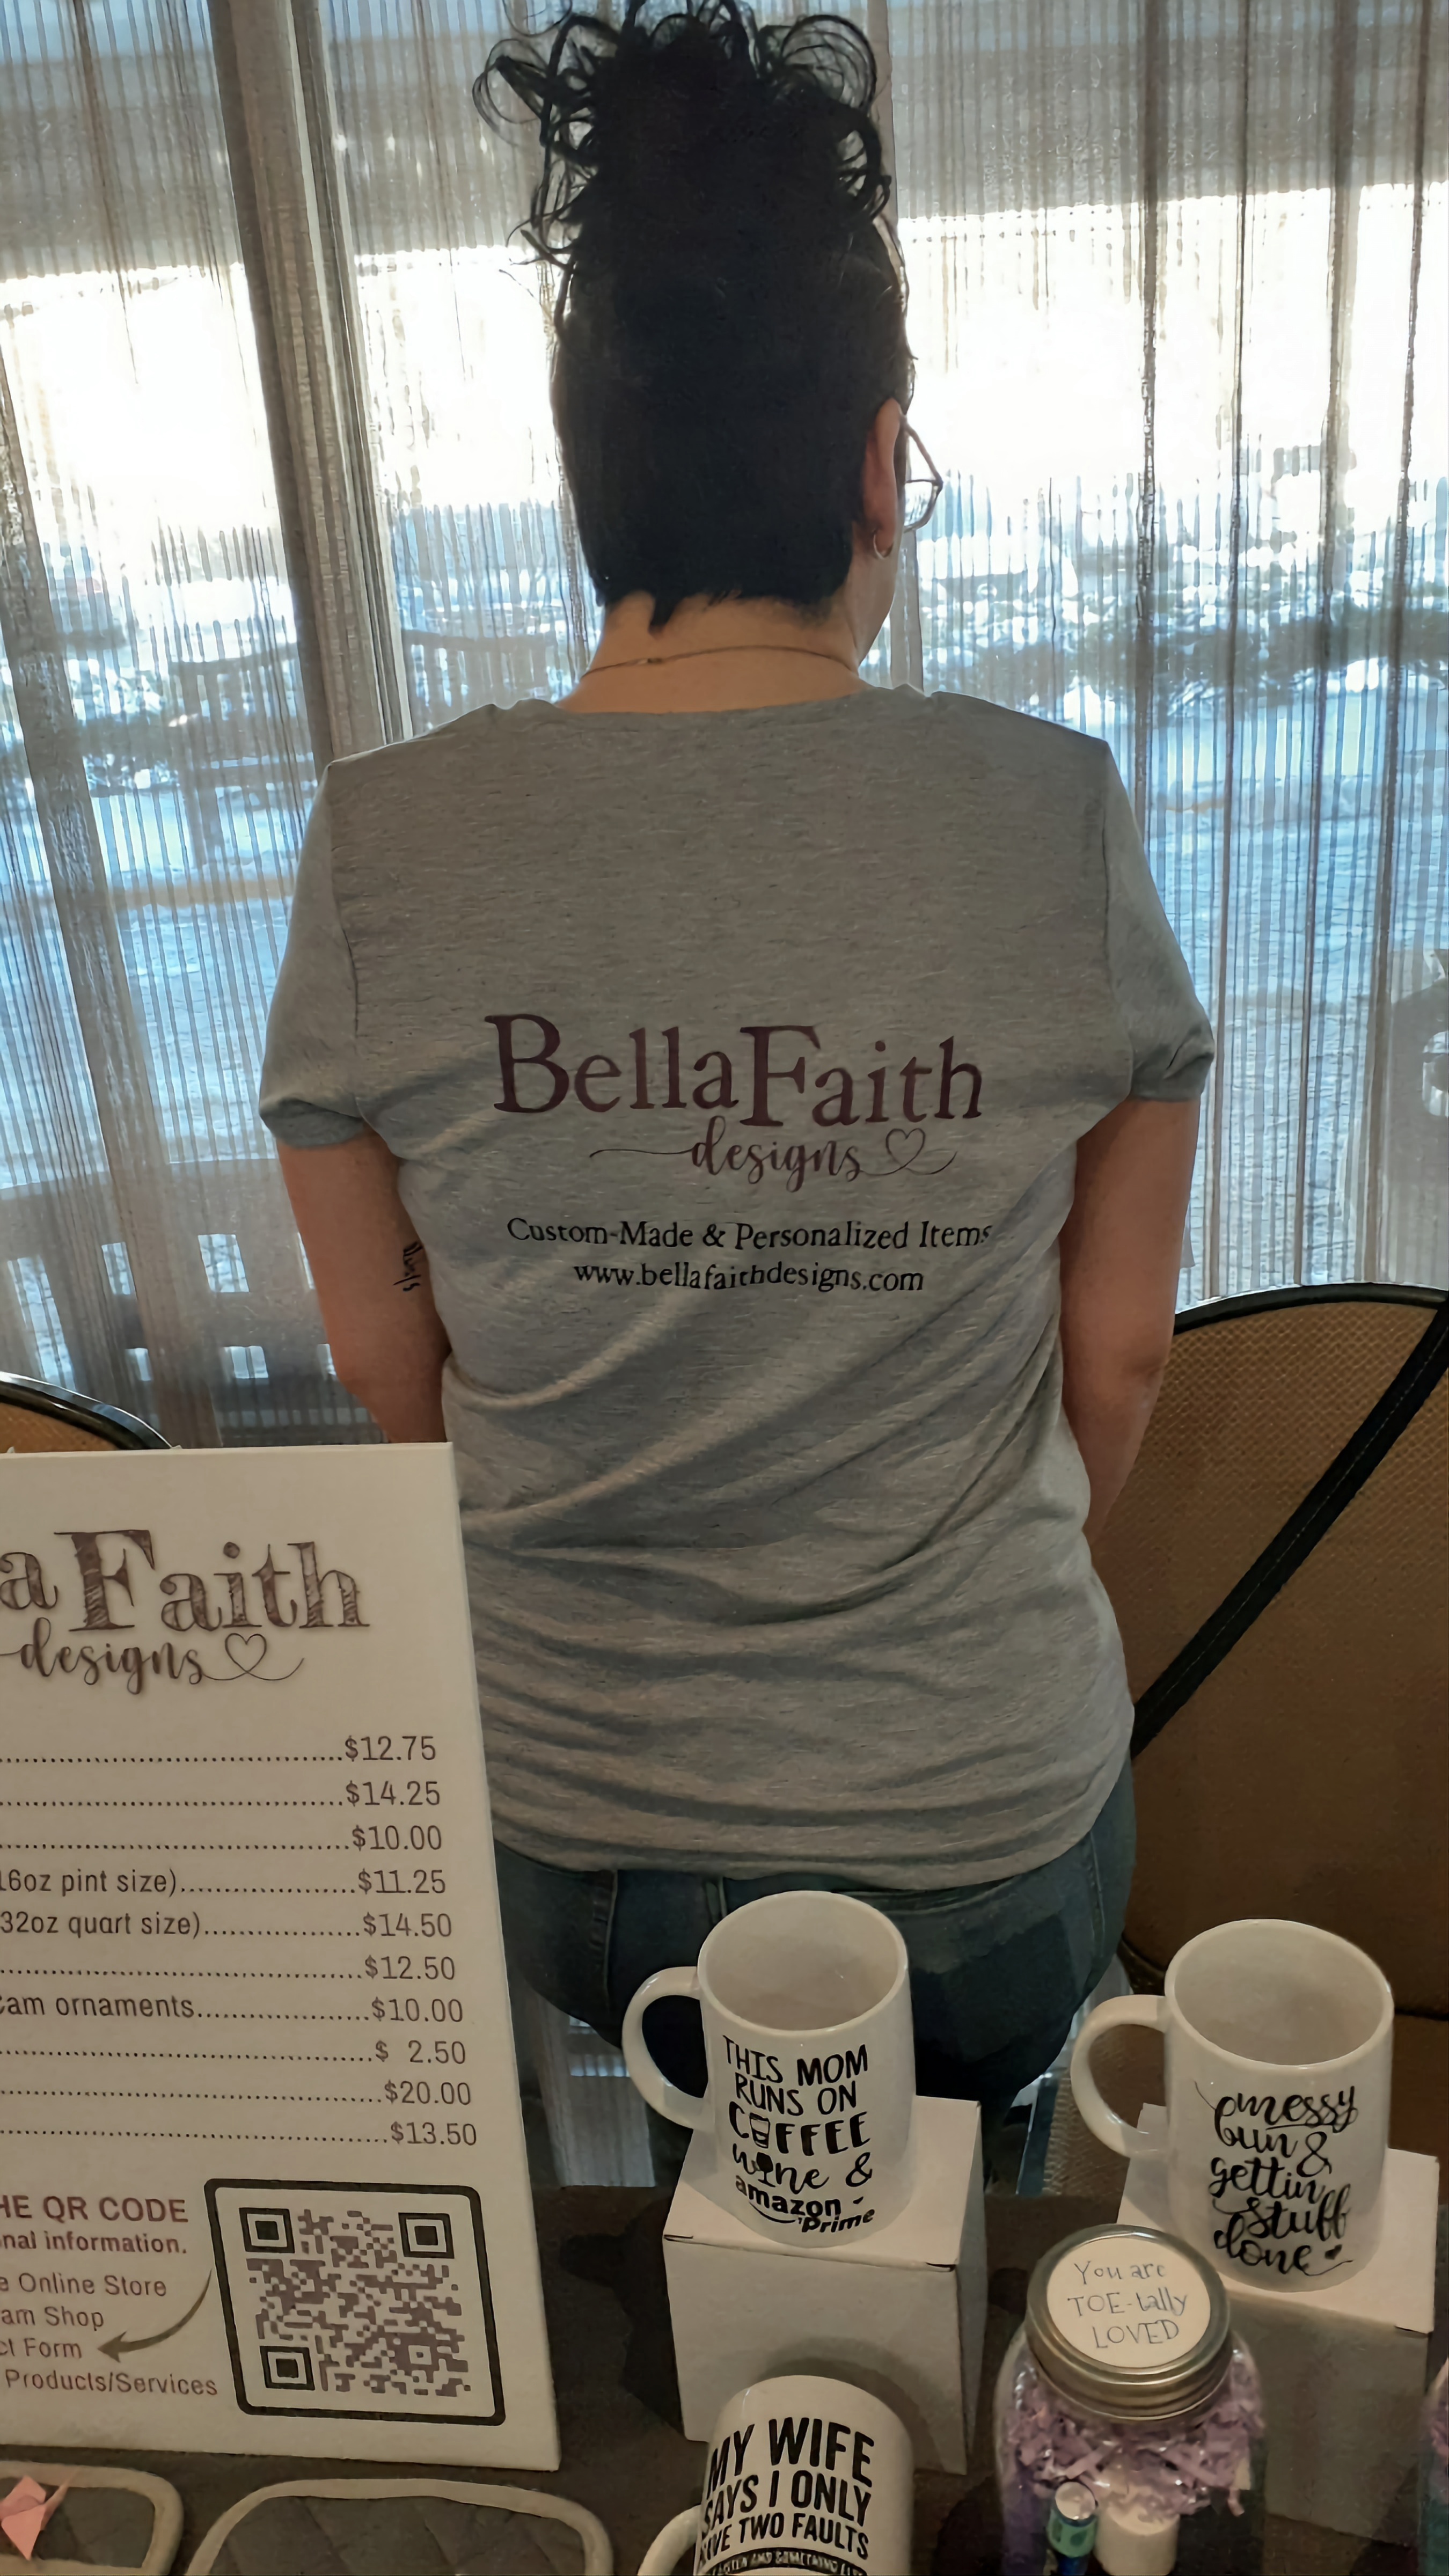 A brunette woman facing the other way at a event showcasing her products wearing a shirt that says Bella Faith Designs on the back.